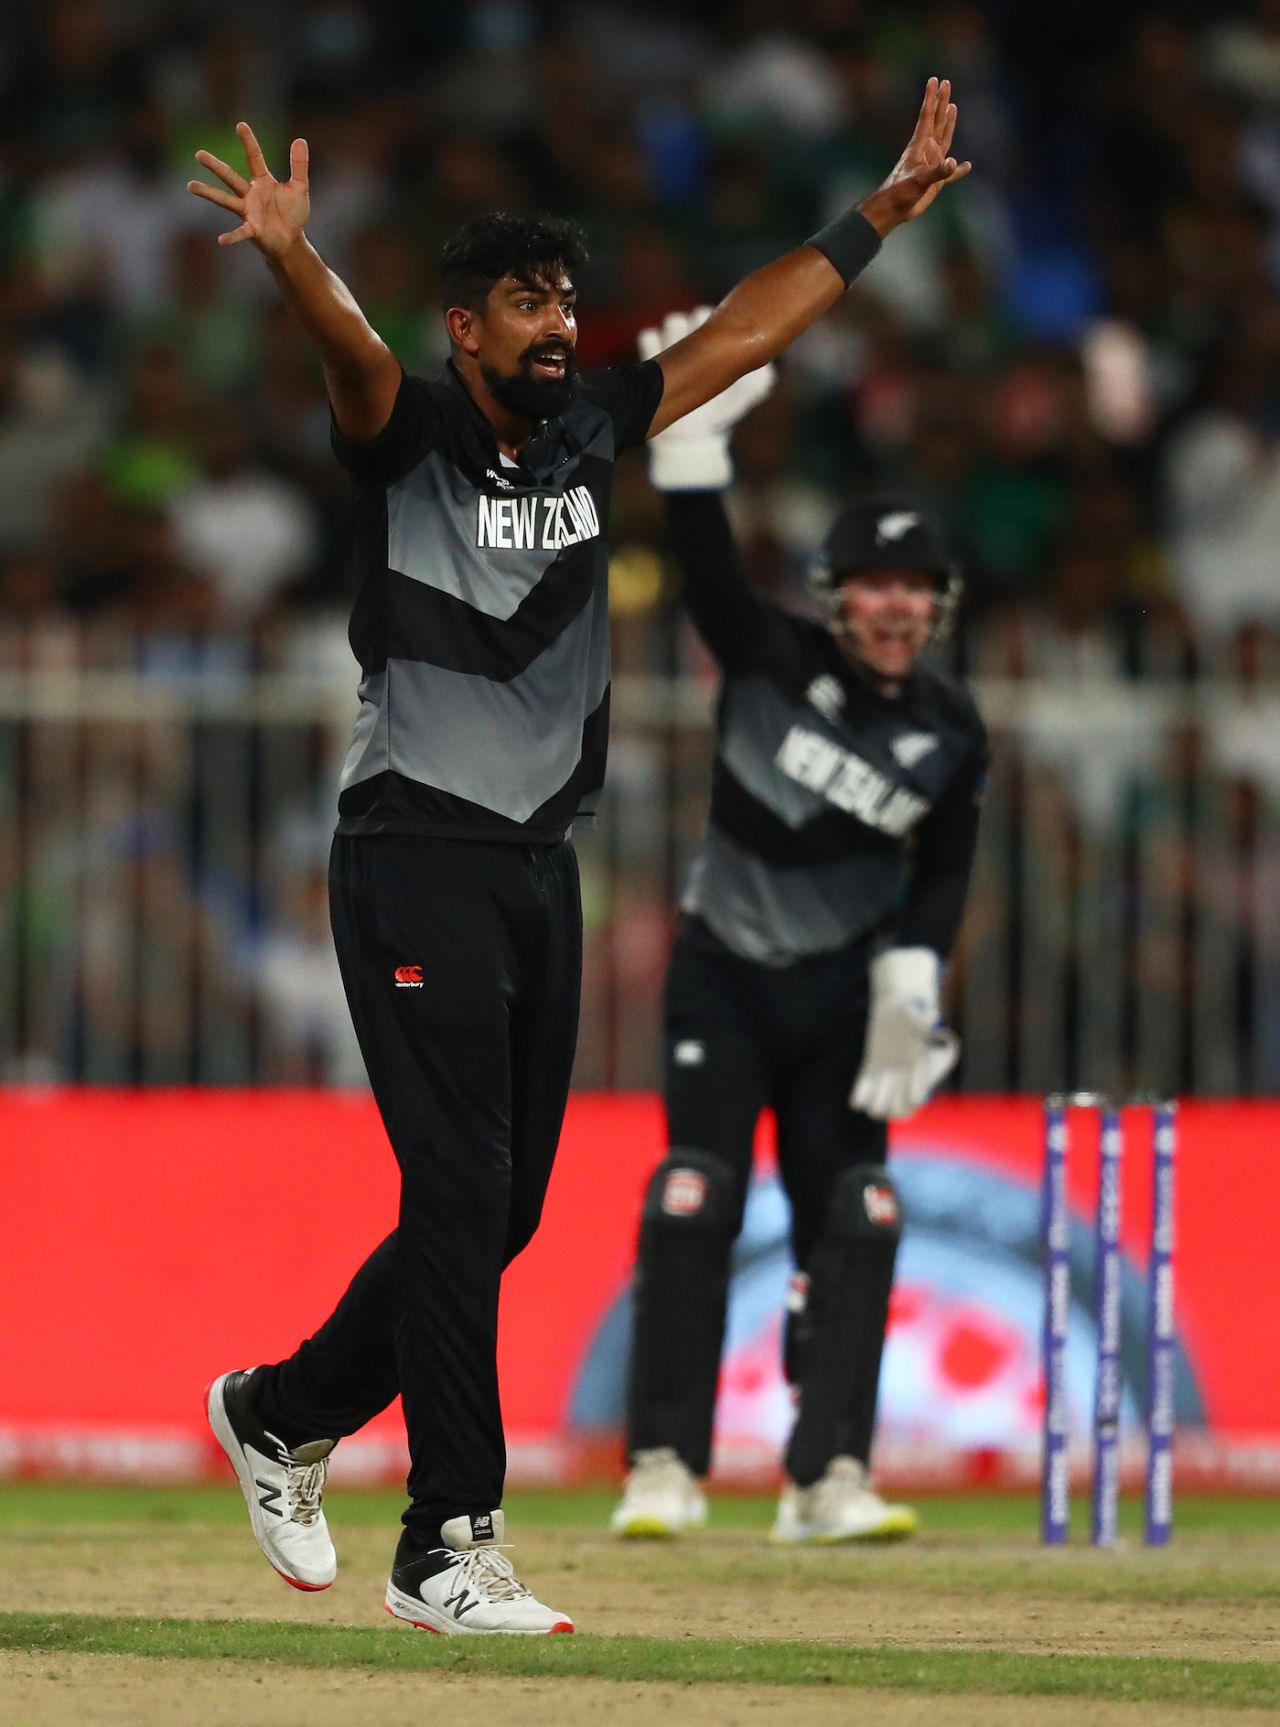 Ish Sodhi goes up in an appeal, Pakistan vs New Zealand, T20 World Cup 2021, Group 2, Sharjah, October 26, 2021